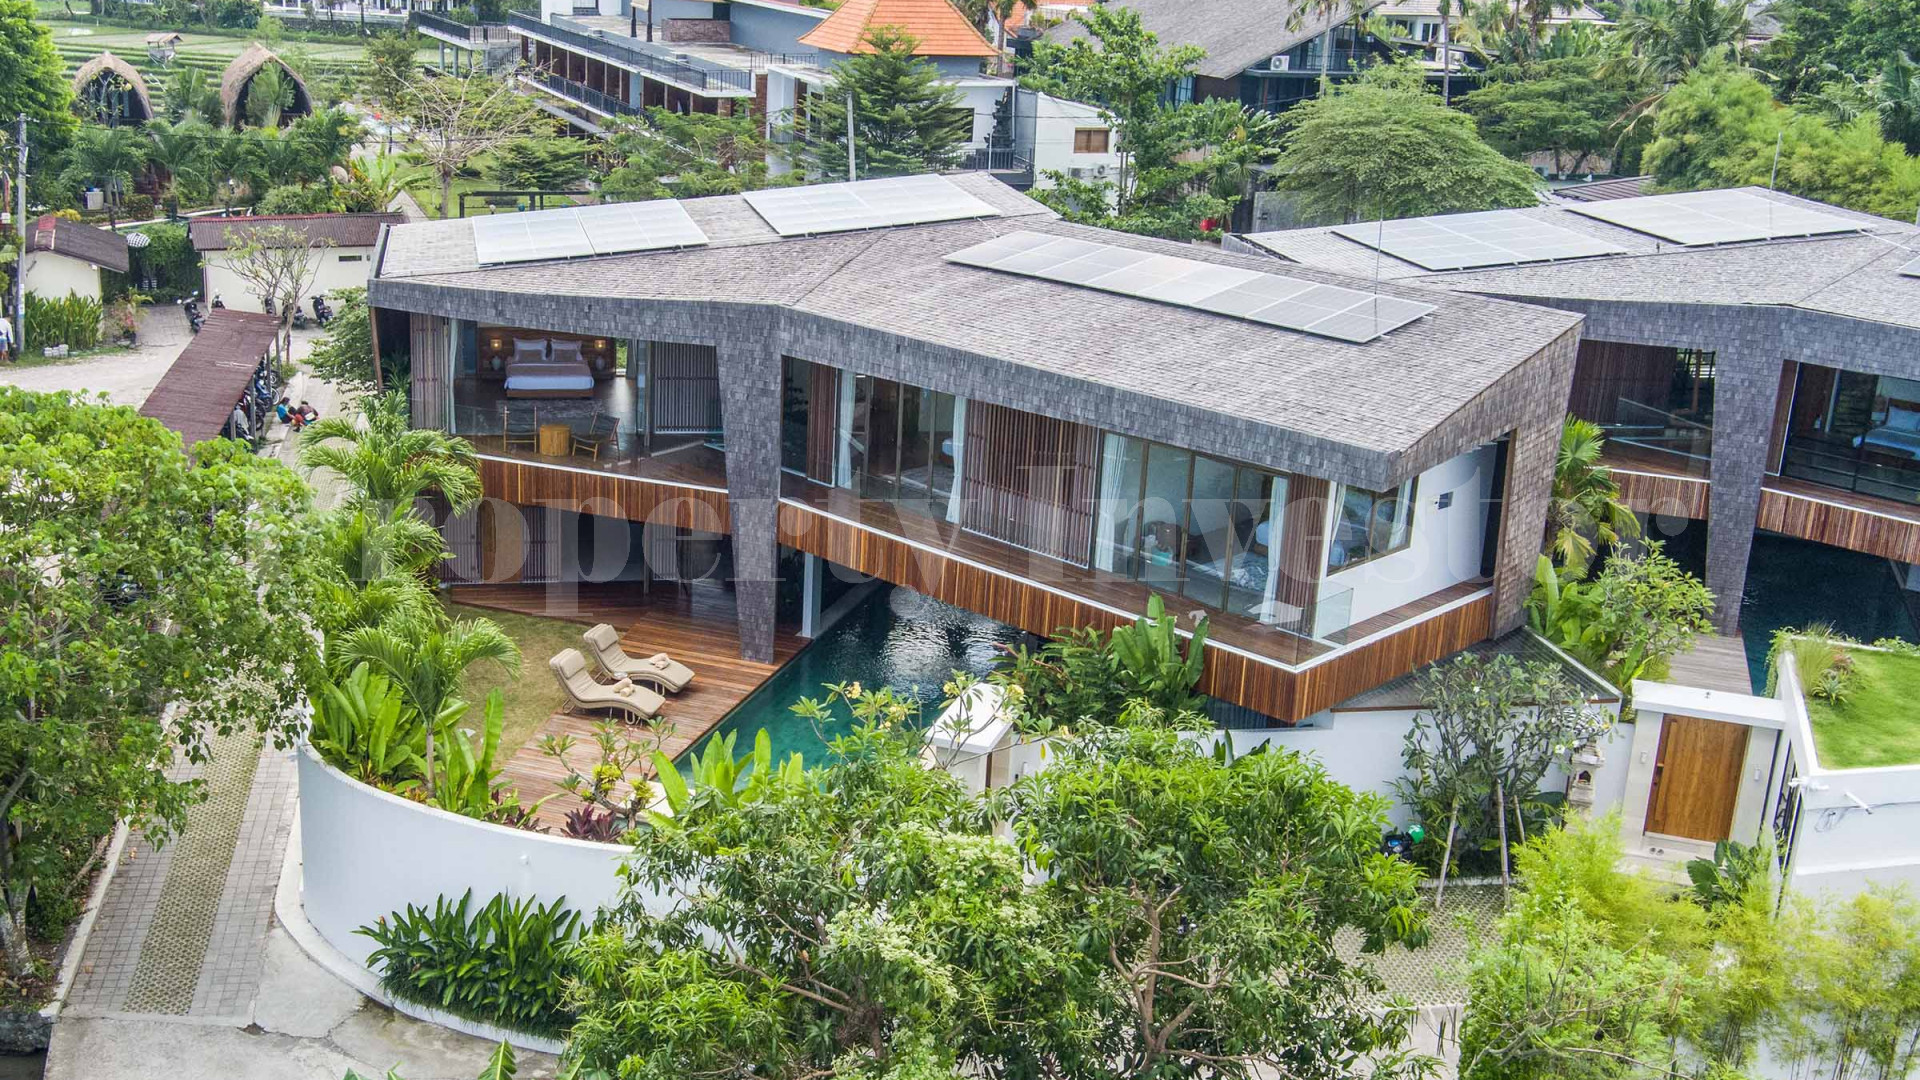 Immaculate 4 Bedroom Ultra-Luxe Villa with High-End Finish for Sale in Canggu Berawa, Bali